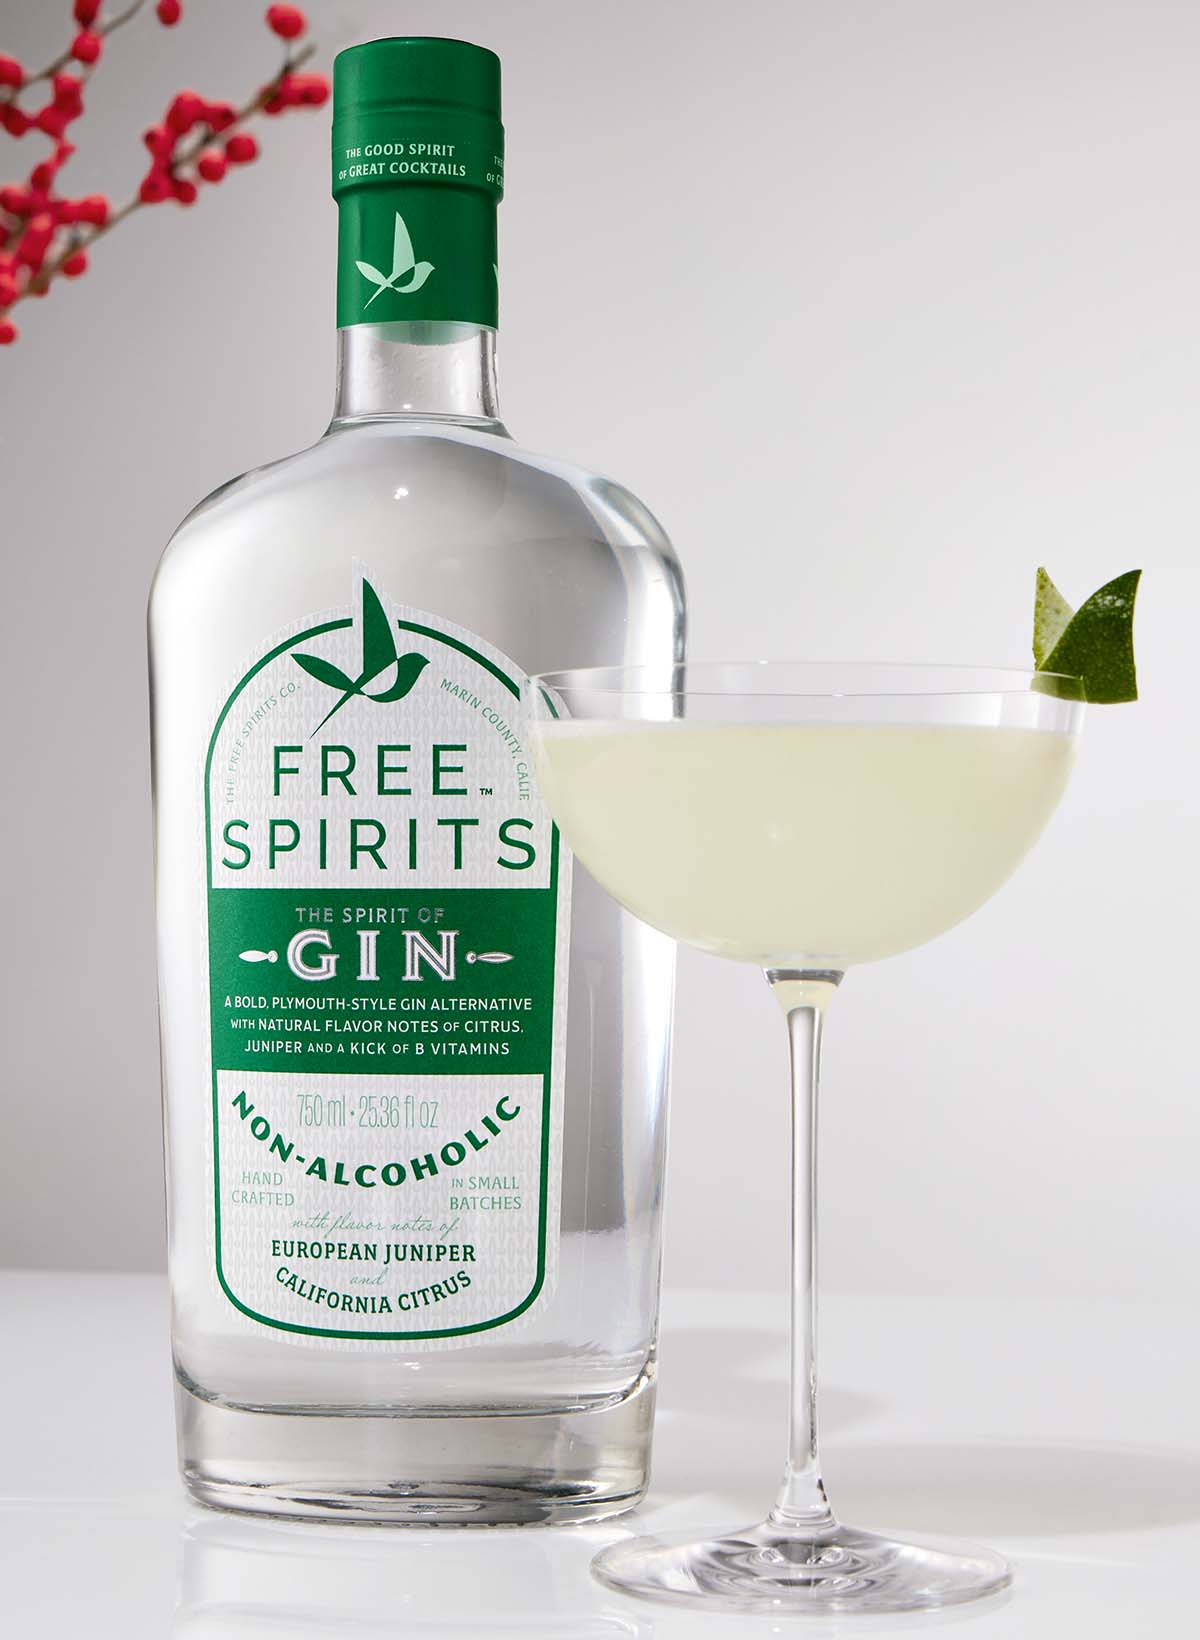 A cocktail made with The Spirit of Gin